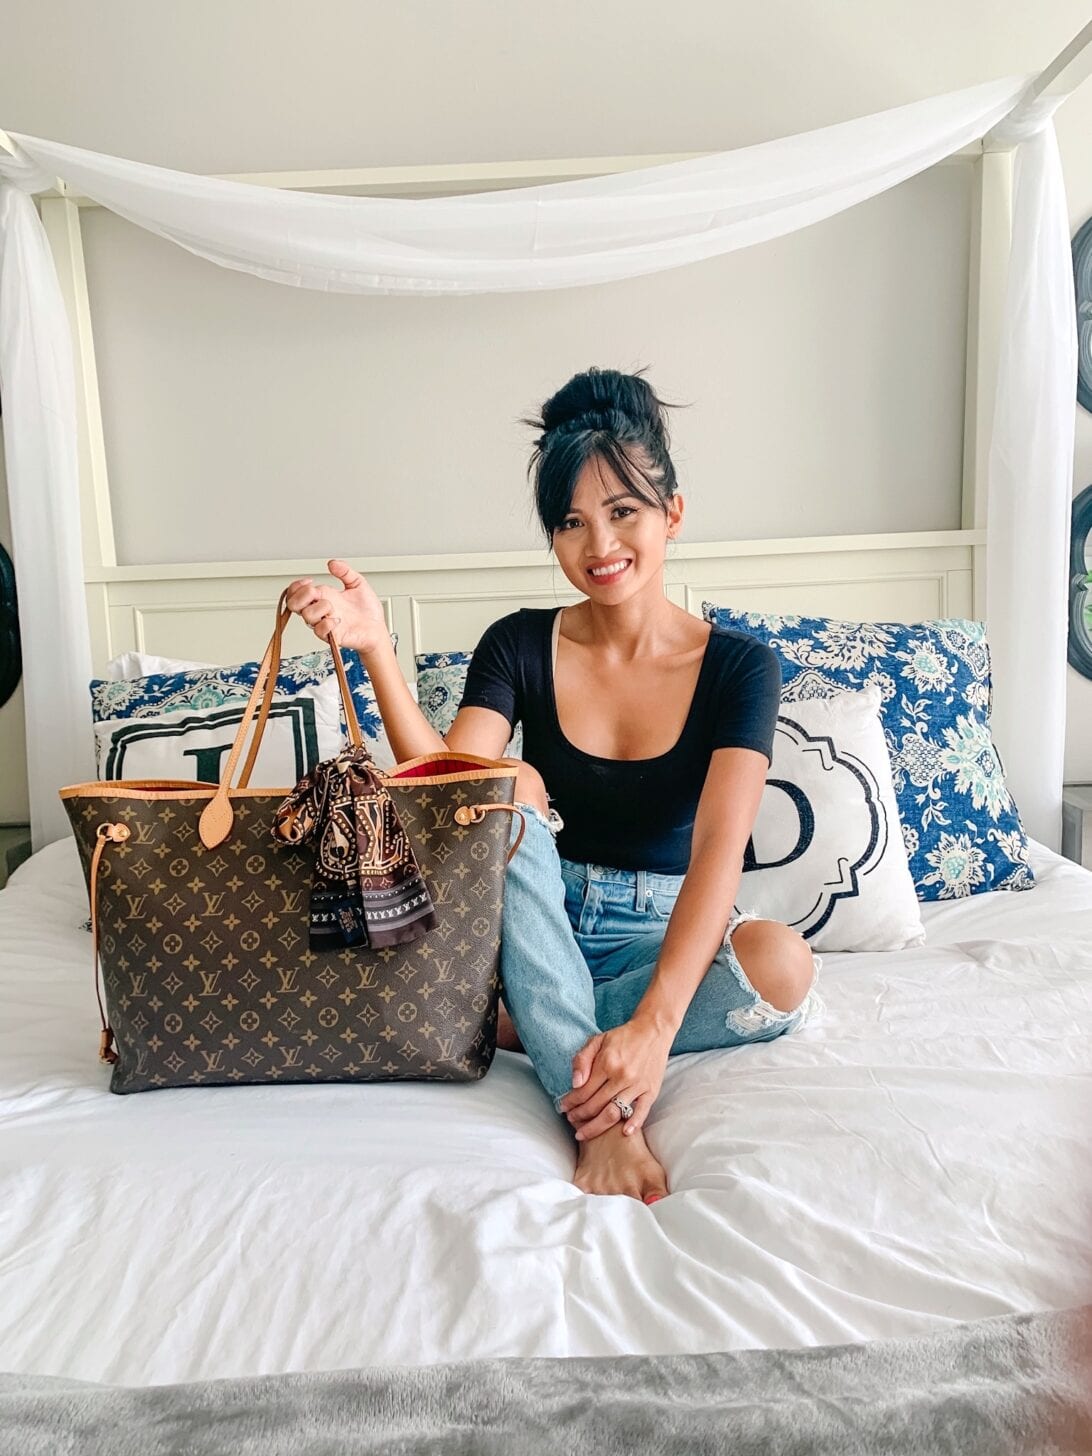 Louis Vuitton Neverfull Two Year Review - Dawn P. Darnell